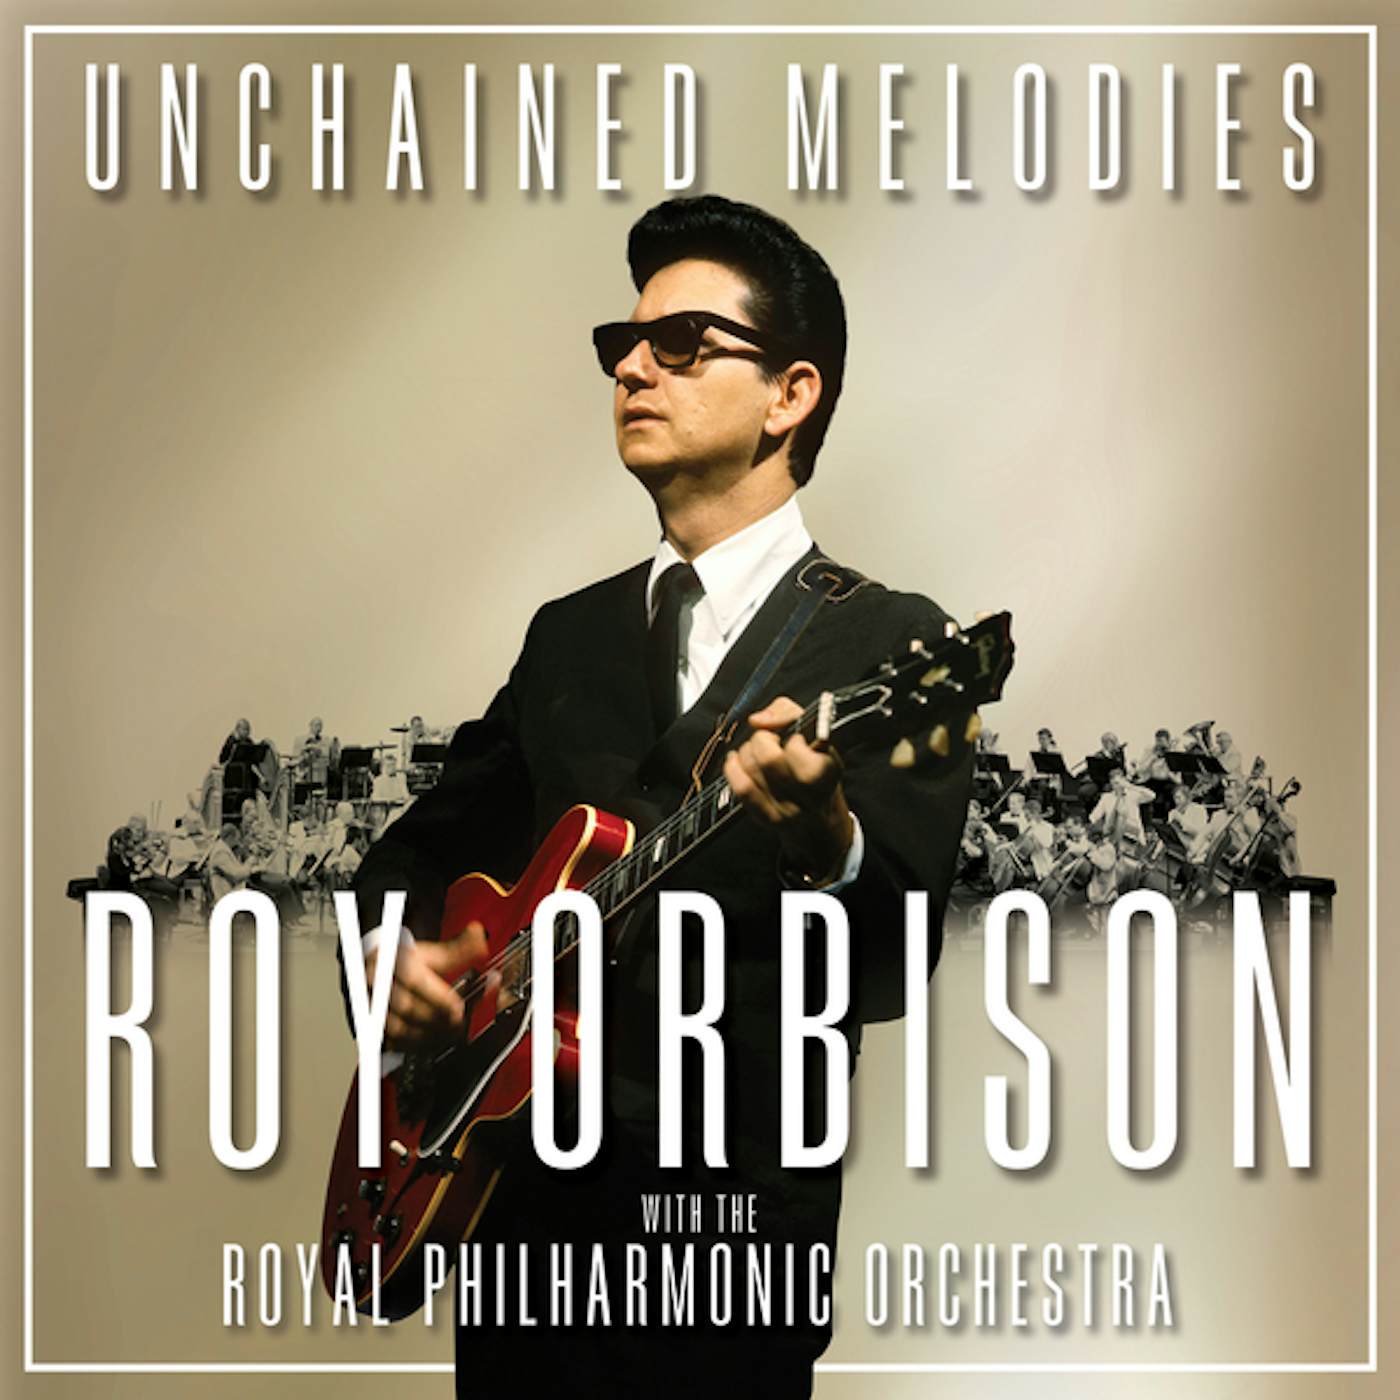 UNCHAINED MELODIES: ROY ORBISON WITH THE ROYAL PHILHARMONIC ORCHESTRA (2LP/140G) Vinyl Record